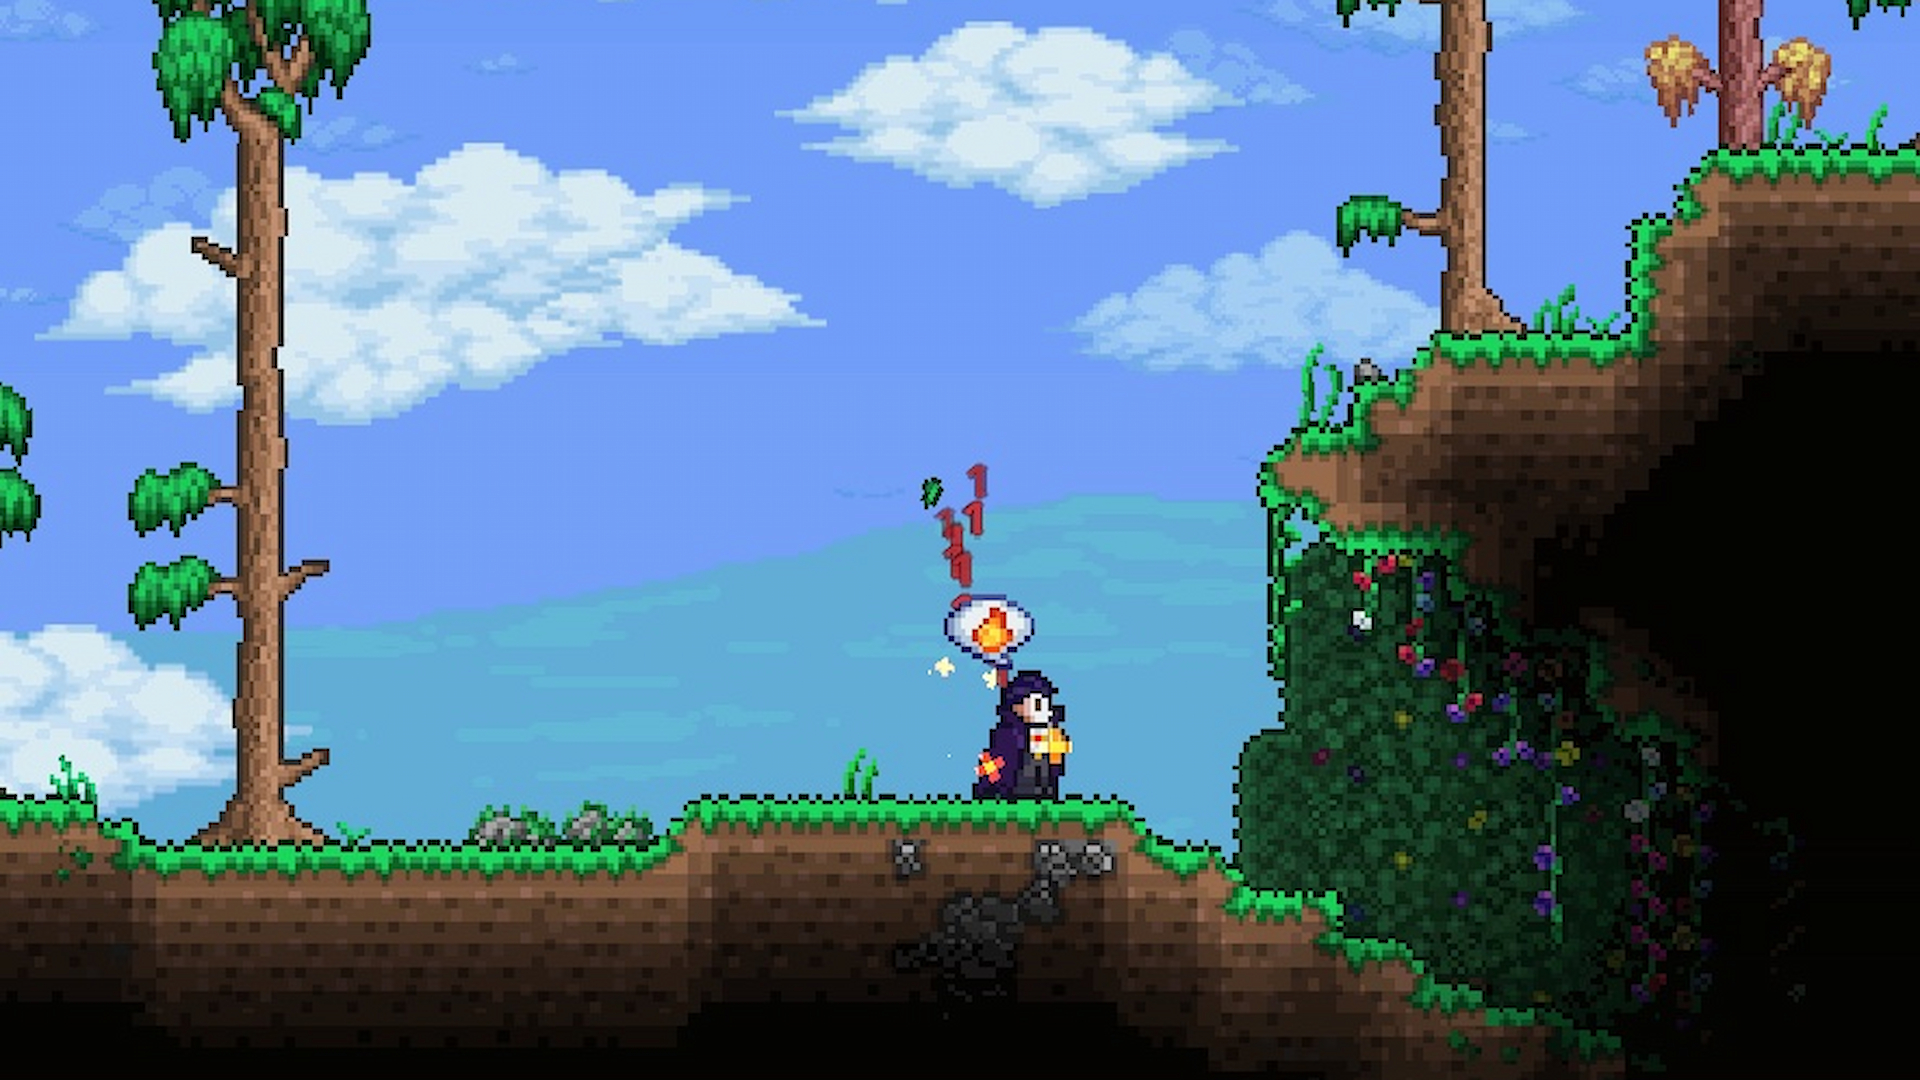 A Terraria character that resembles Dracula stands in the sunlight, burning